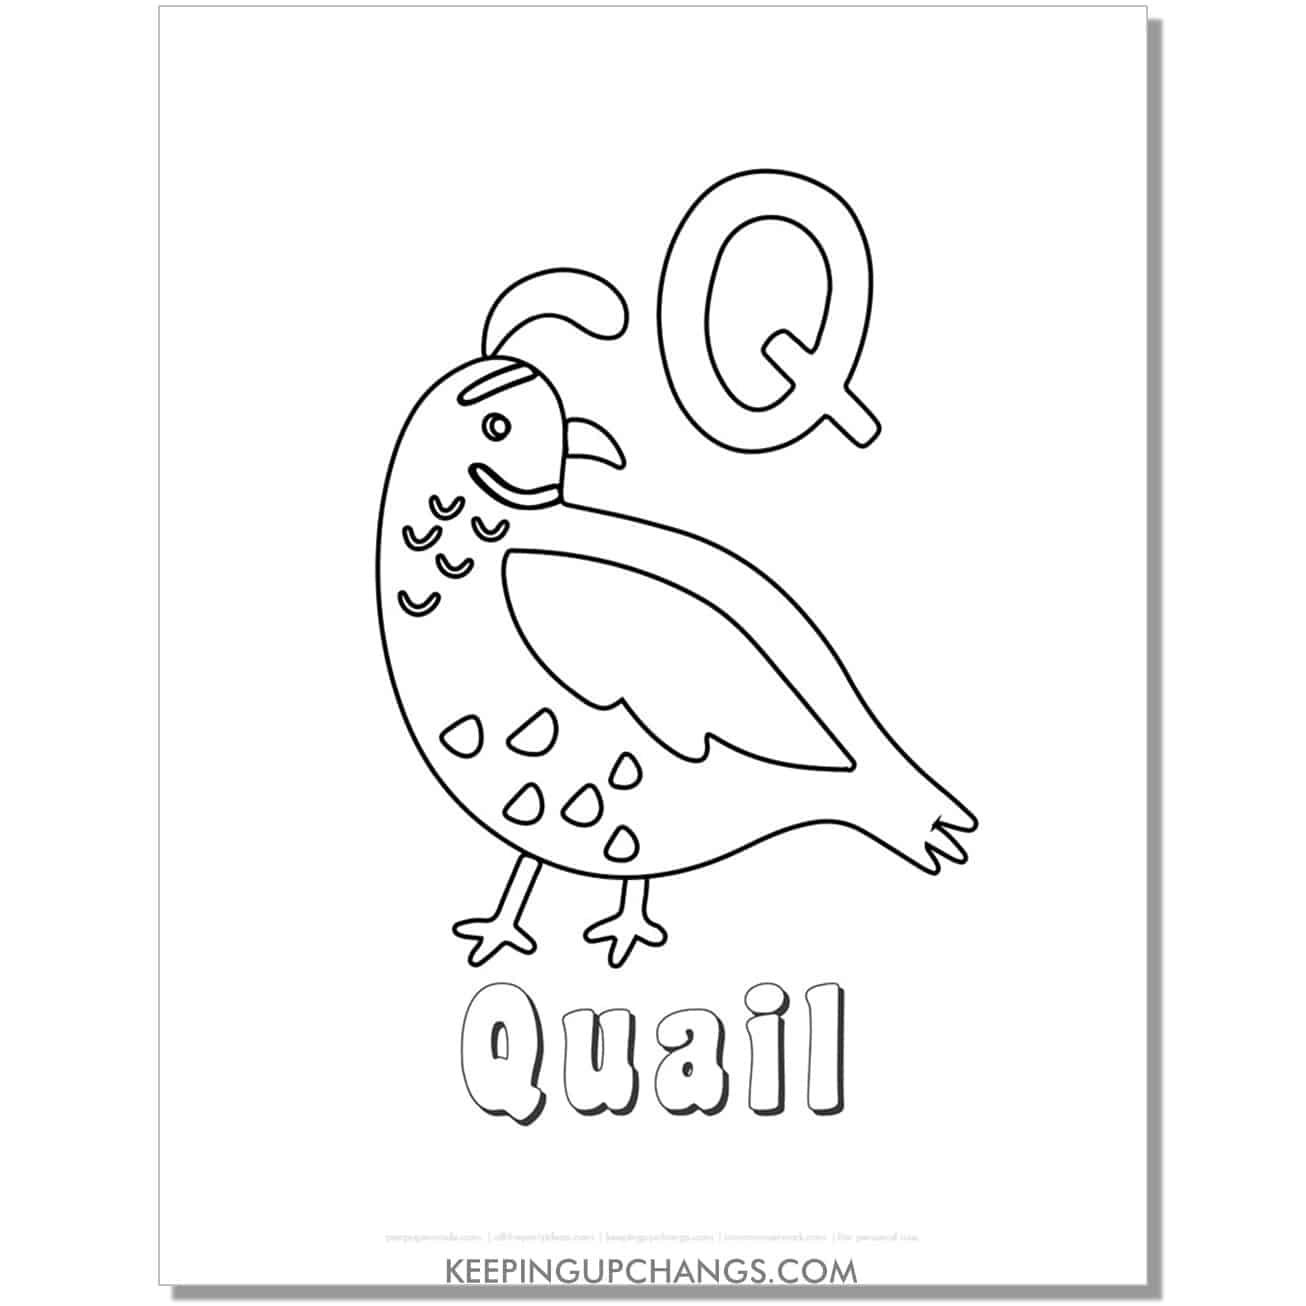 fun abc q coloring page with quail hand drawing.